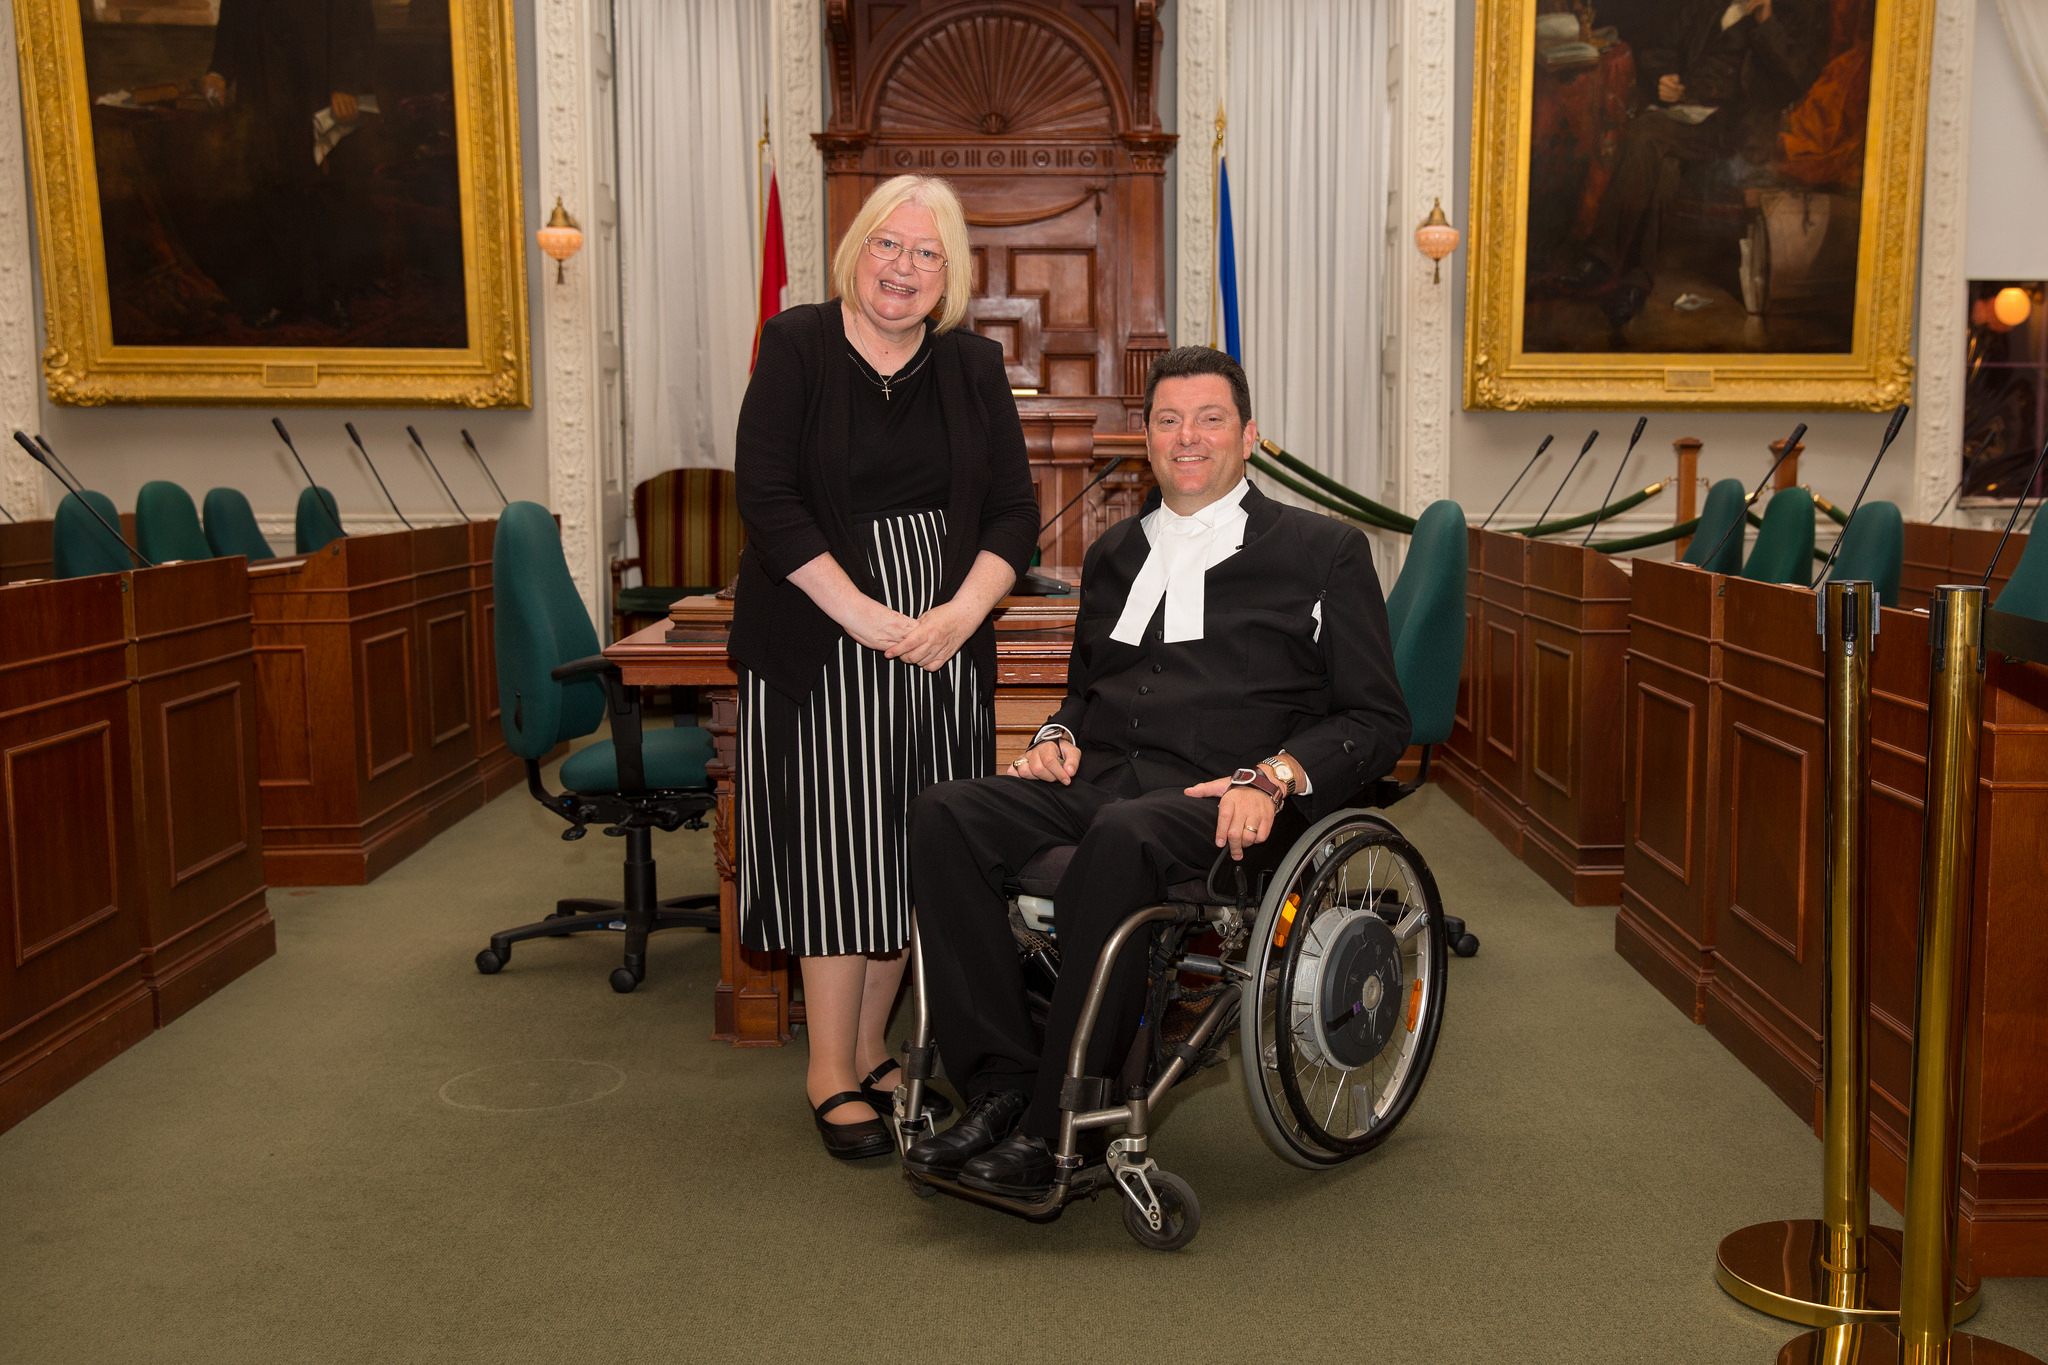 Ann Jones at the Commonwealth Parliamentary Association’sAnn Jones with Kevin Murphy, speaker of the Nova Scotia Assembly in Canada inaugural conference for parliamentarians with disabilities in Nova Scotia, Canada